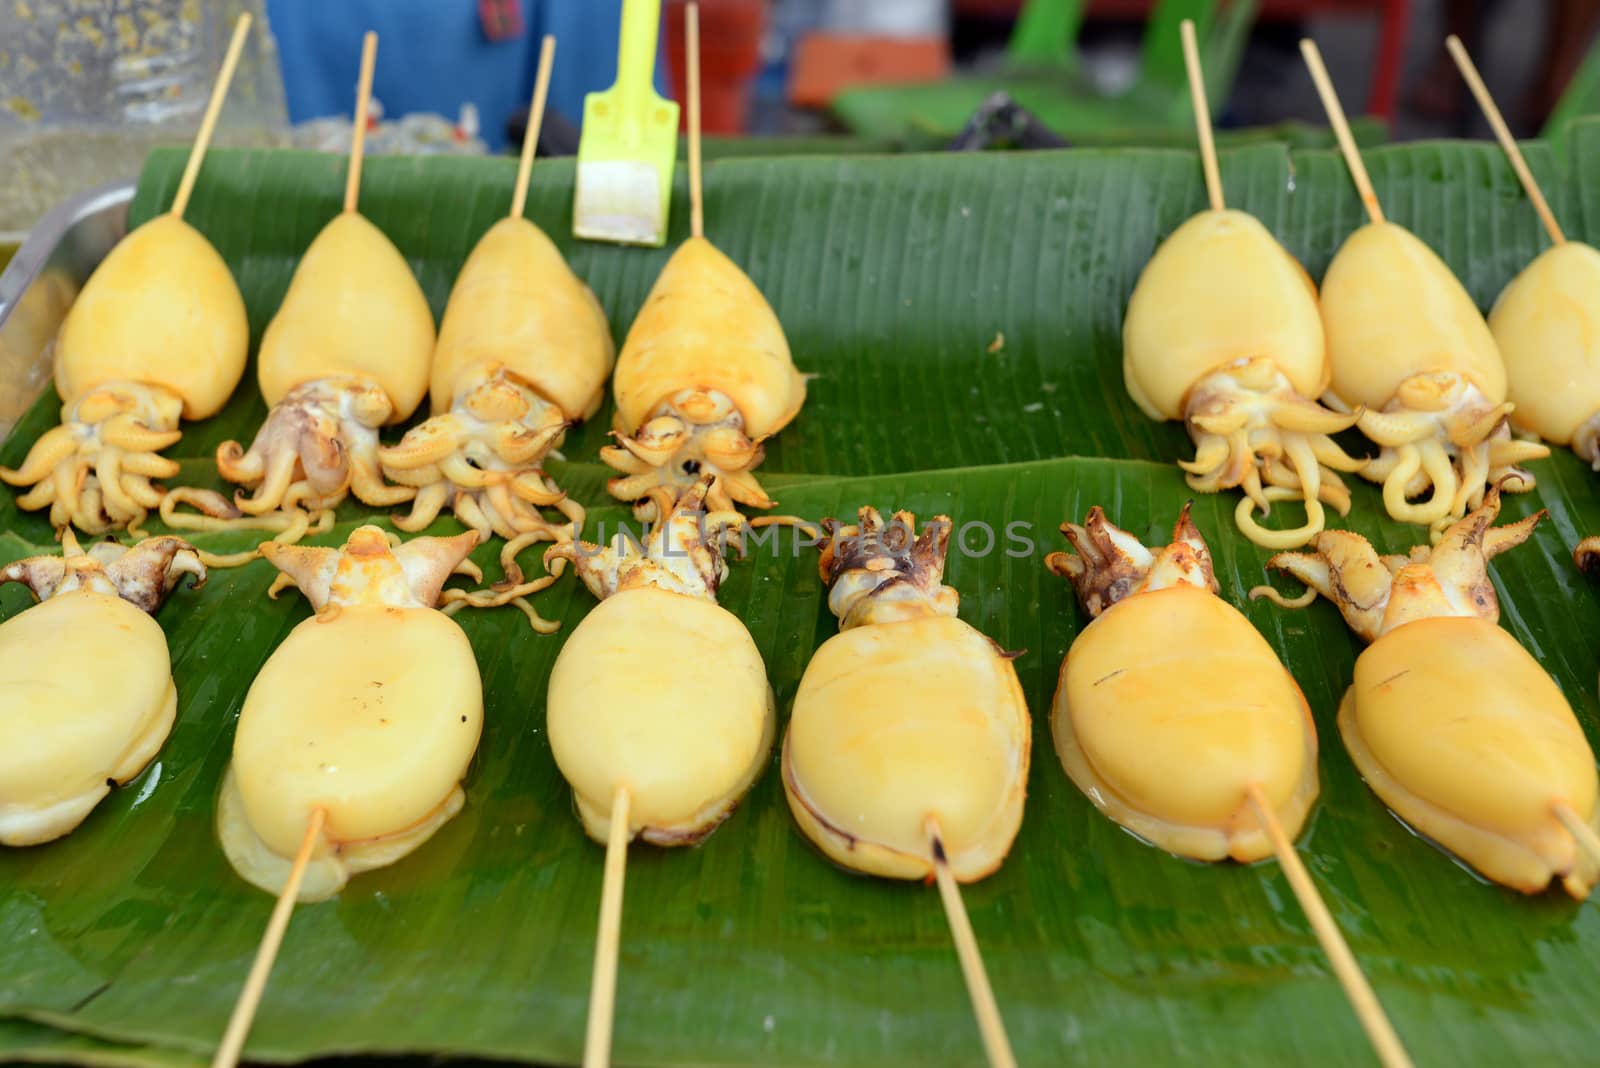 Squid carapace, skewers placed on a green banana leaf for sale